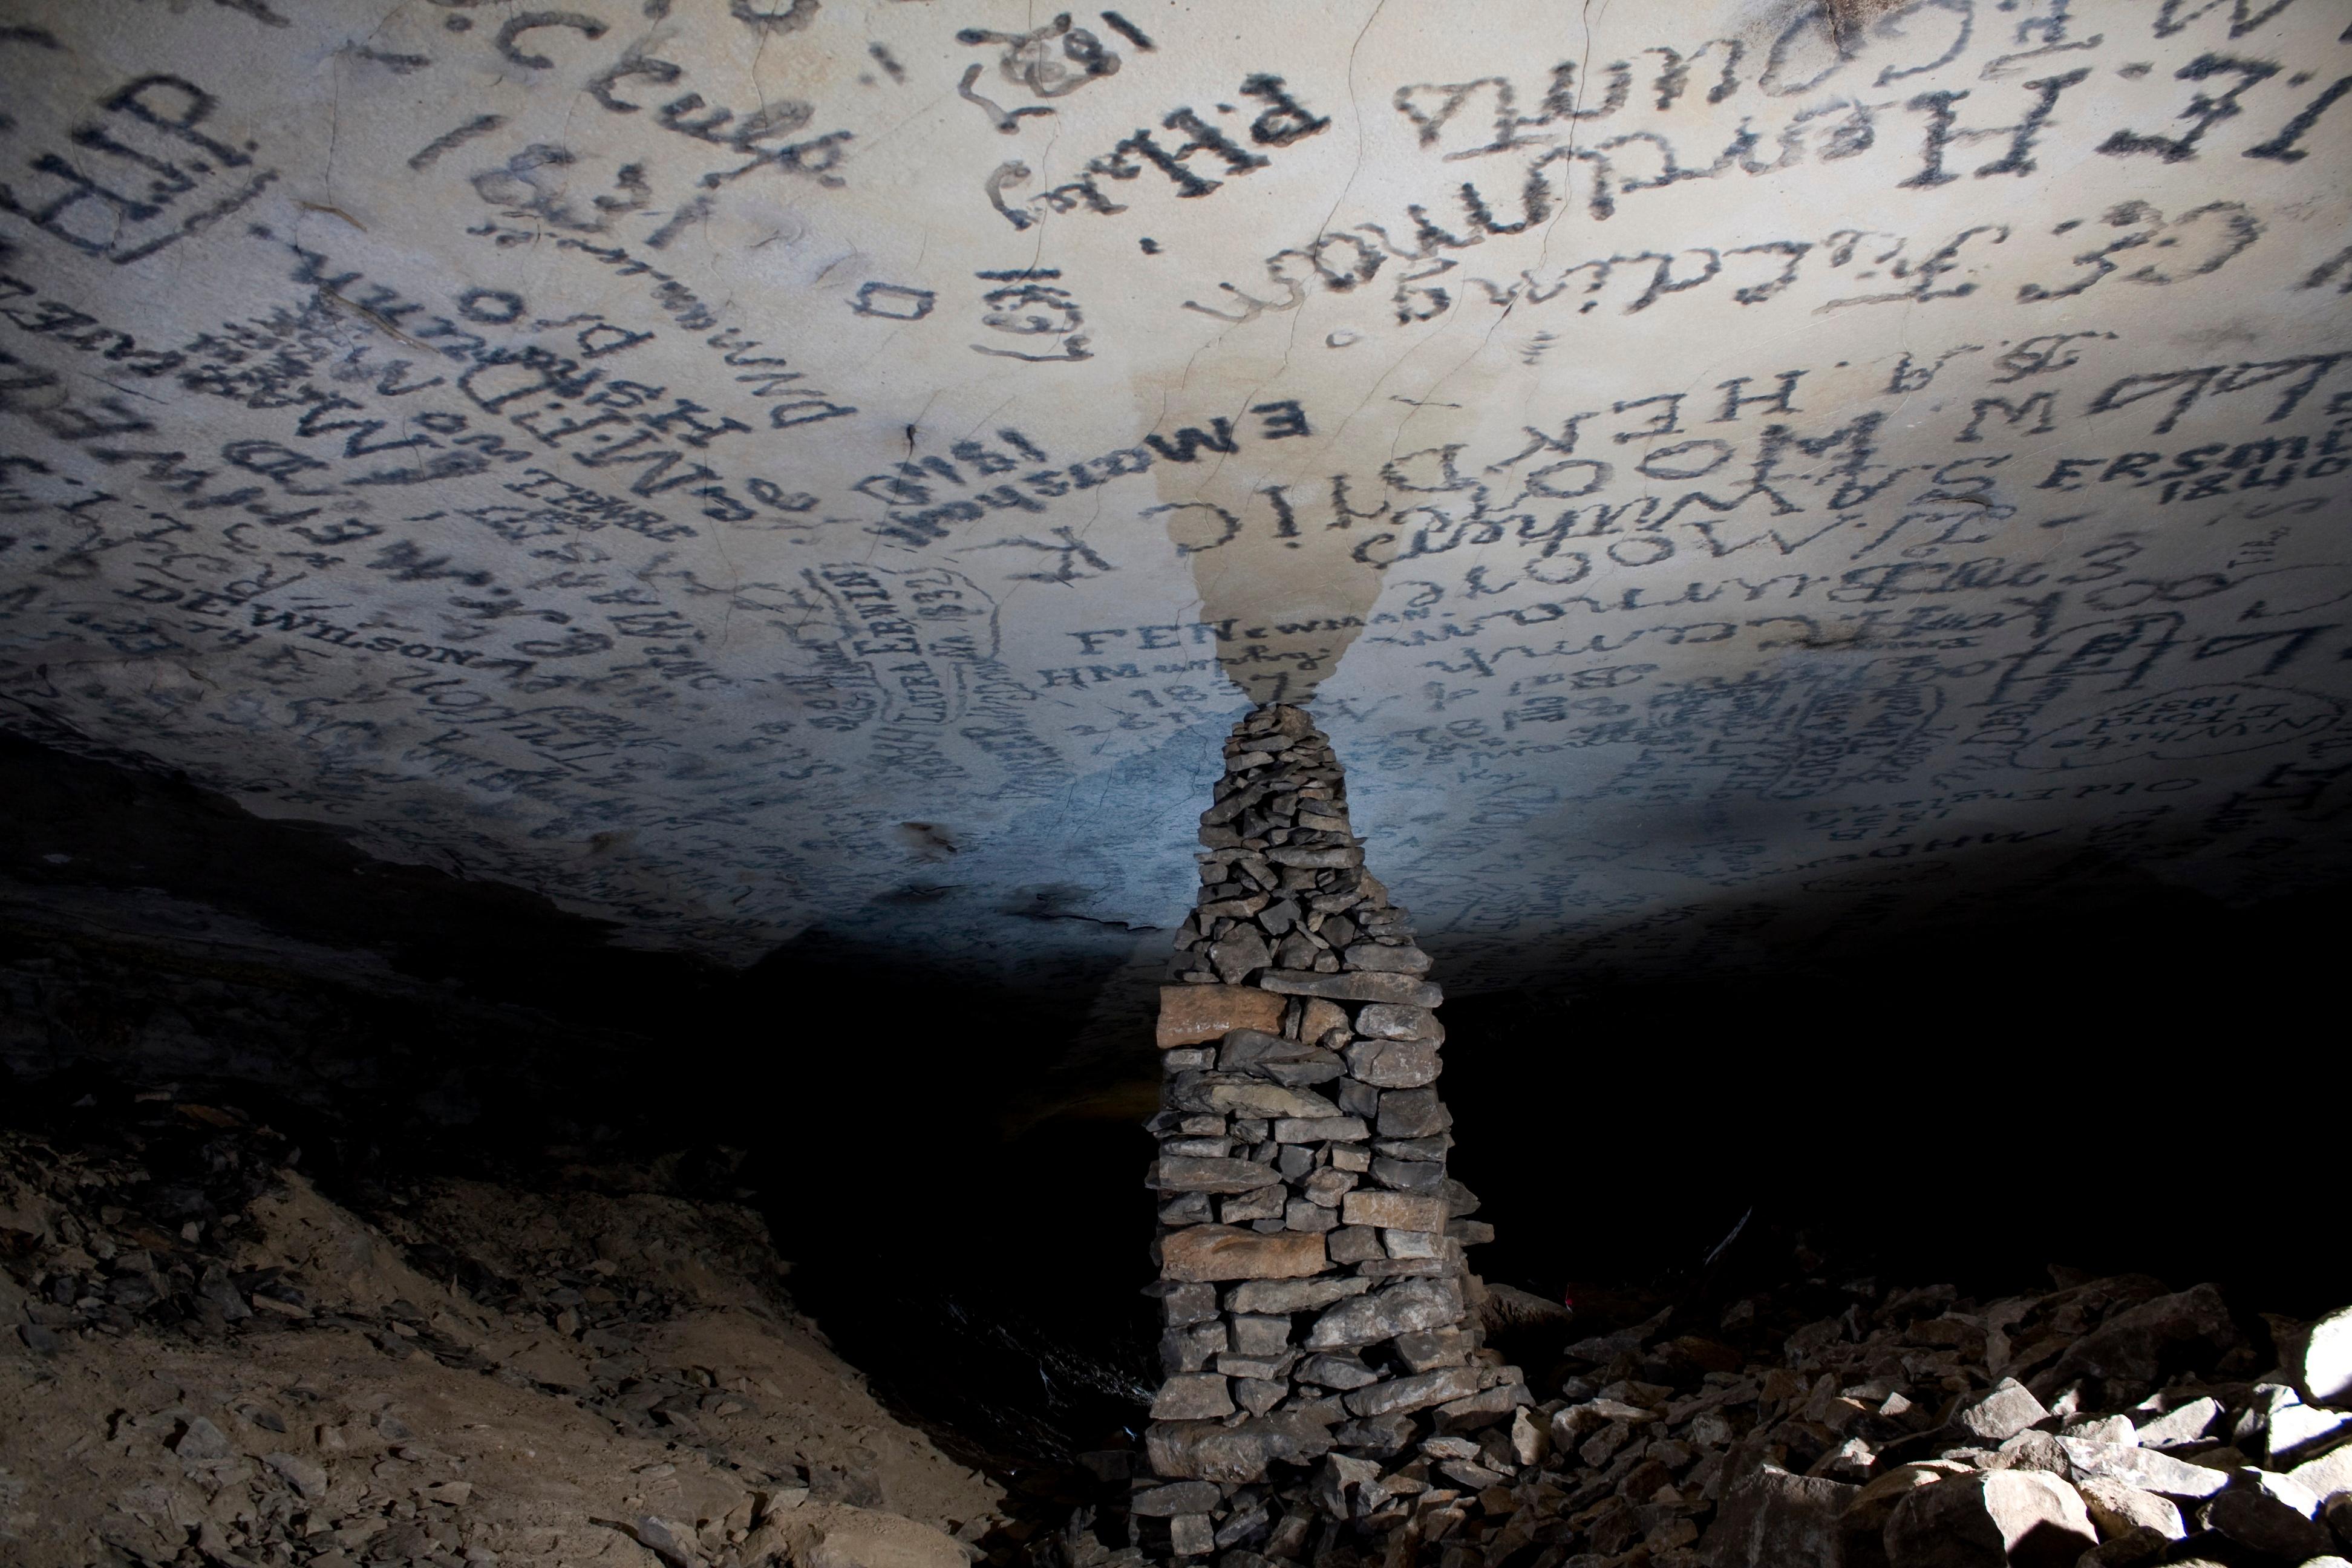 A large stacked stone pillar reaches the flat ceiling containing signatures in a cave passage.